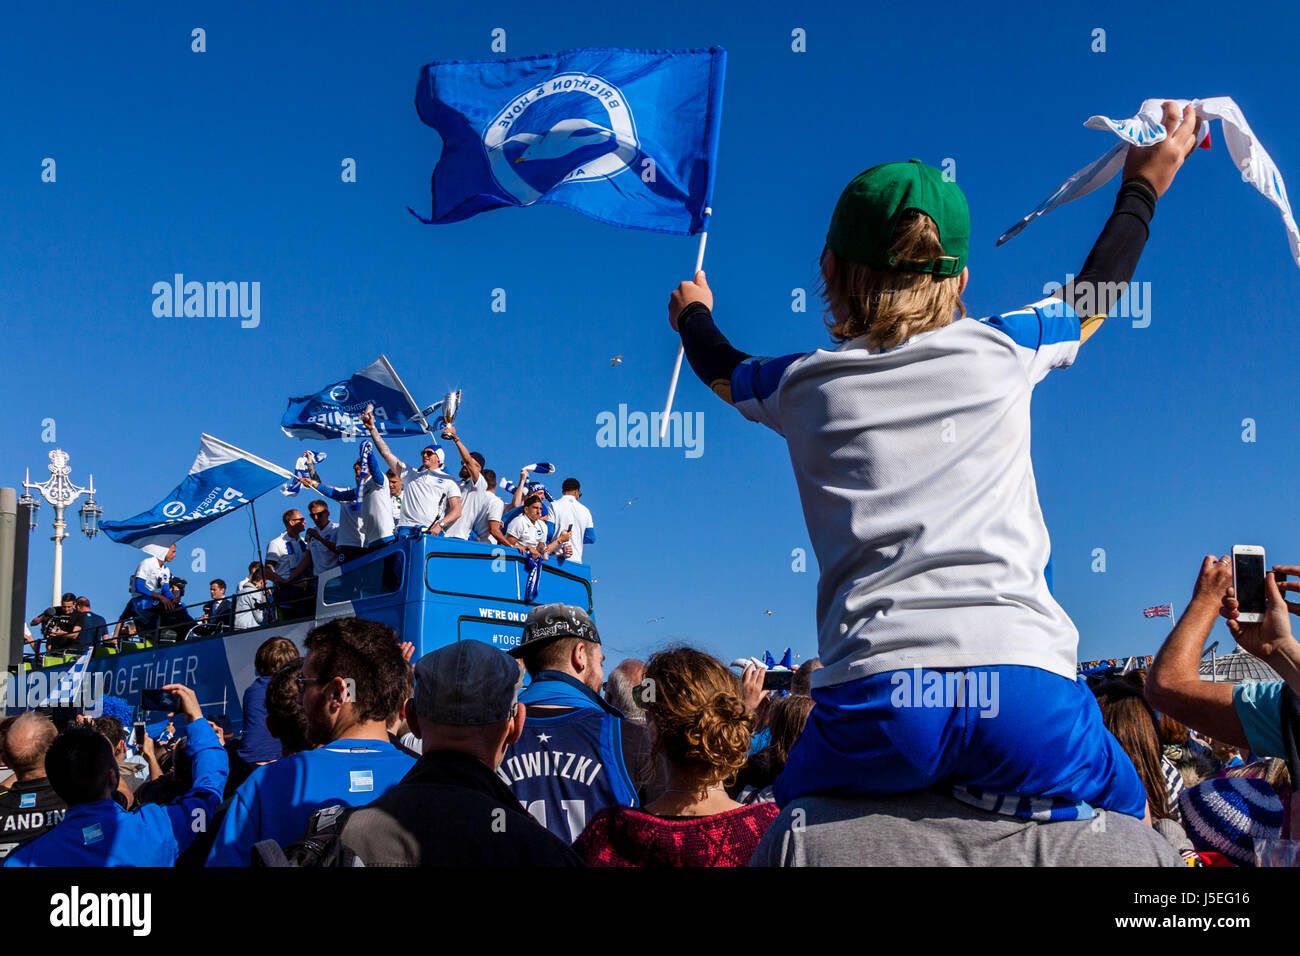 A Cheering Young Brighton and Hove Albion Football Fan Watches As The Team Bus Passes During The Club's Promotion Parade, Brighton, Sussex, UK Stock Photo